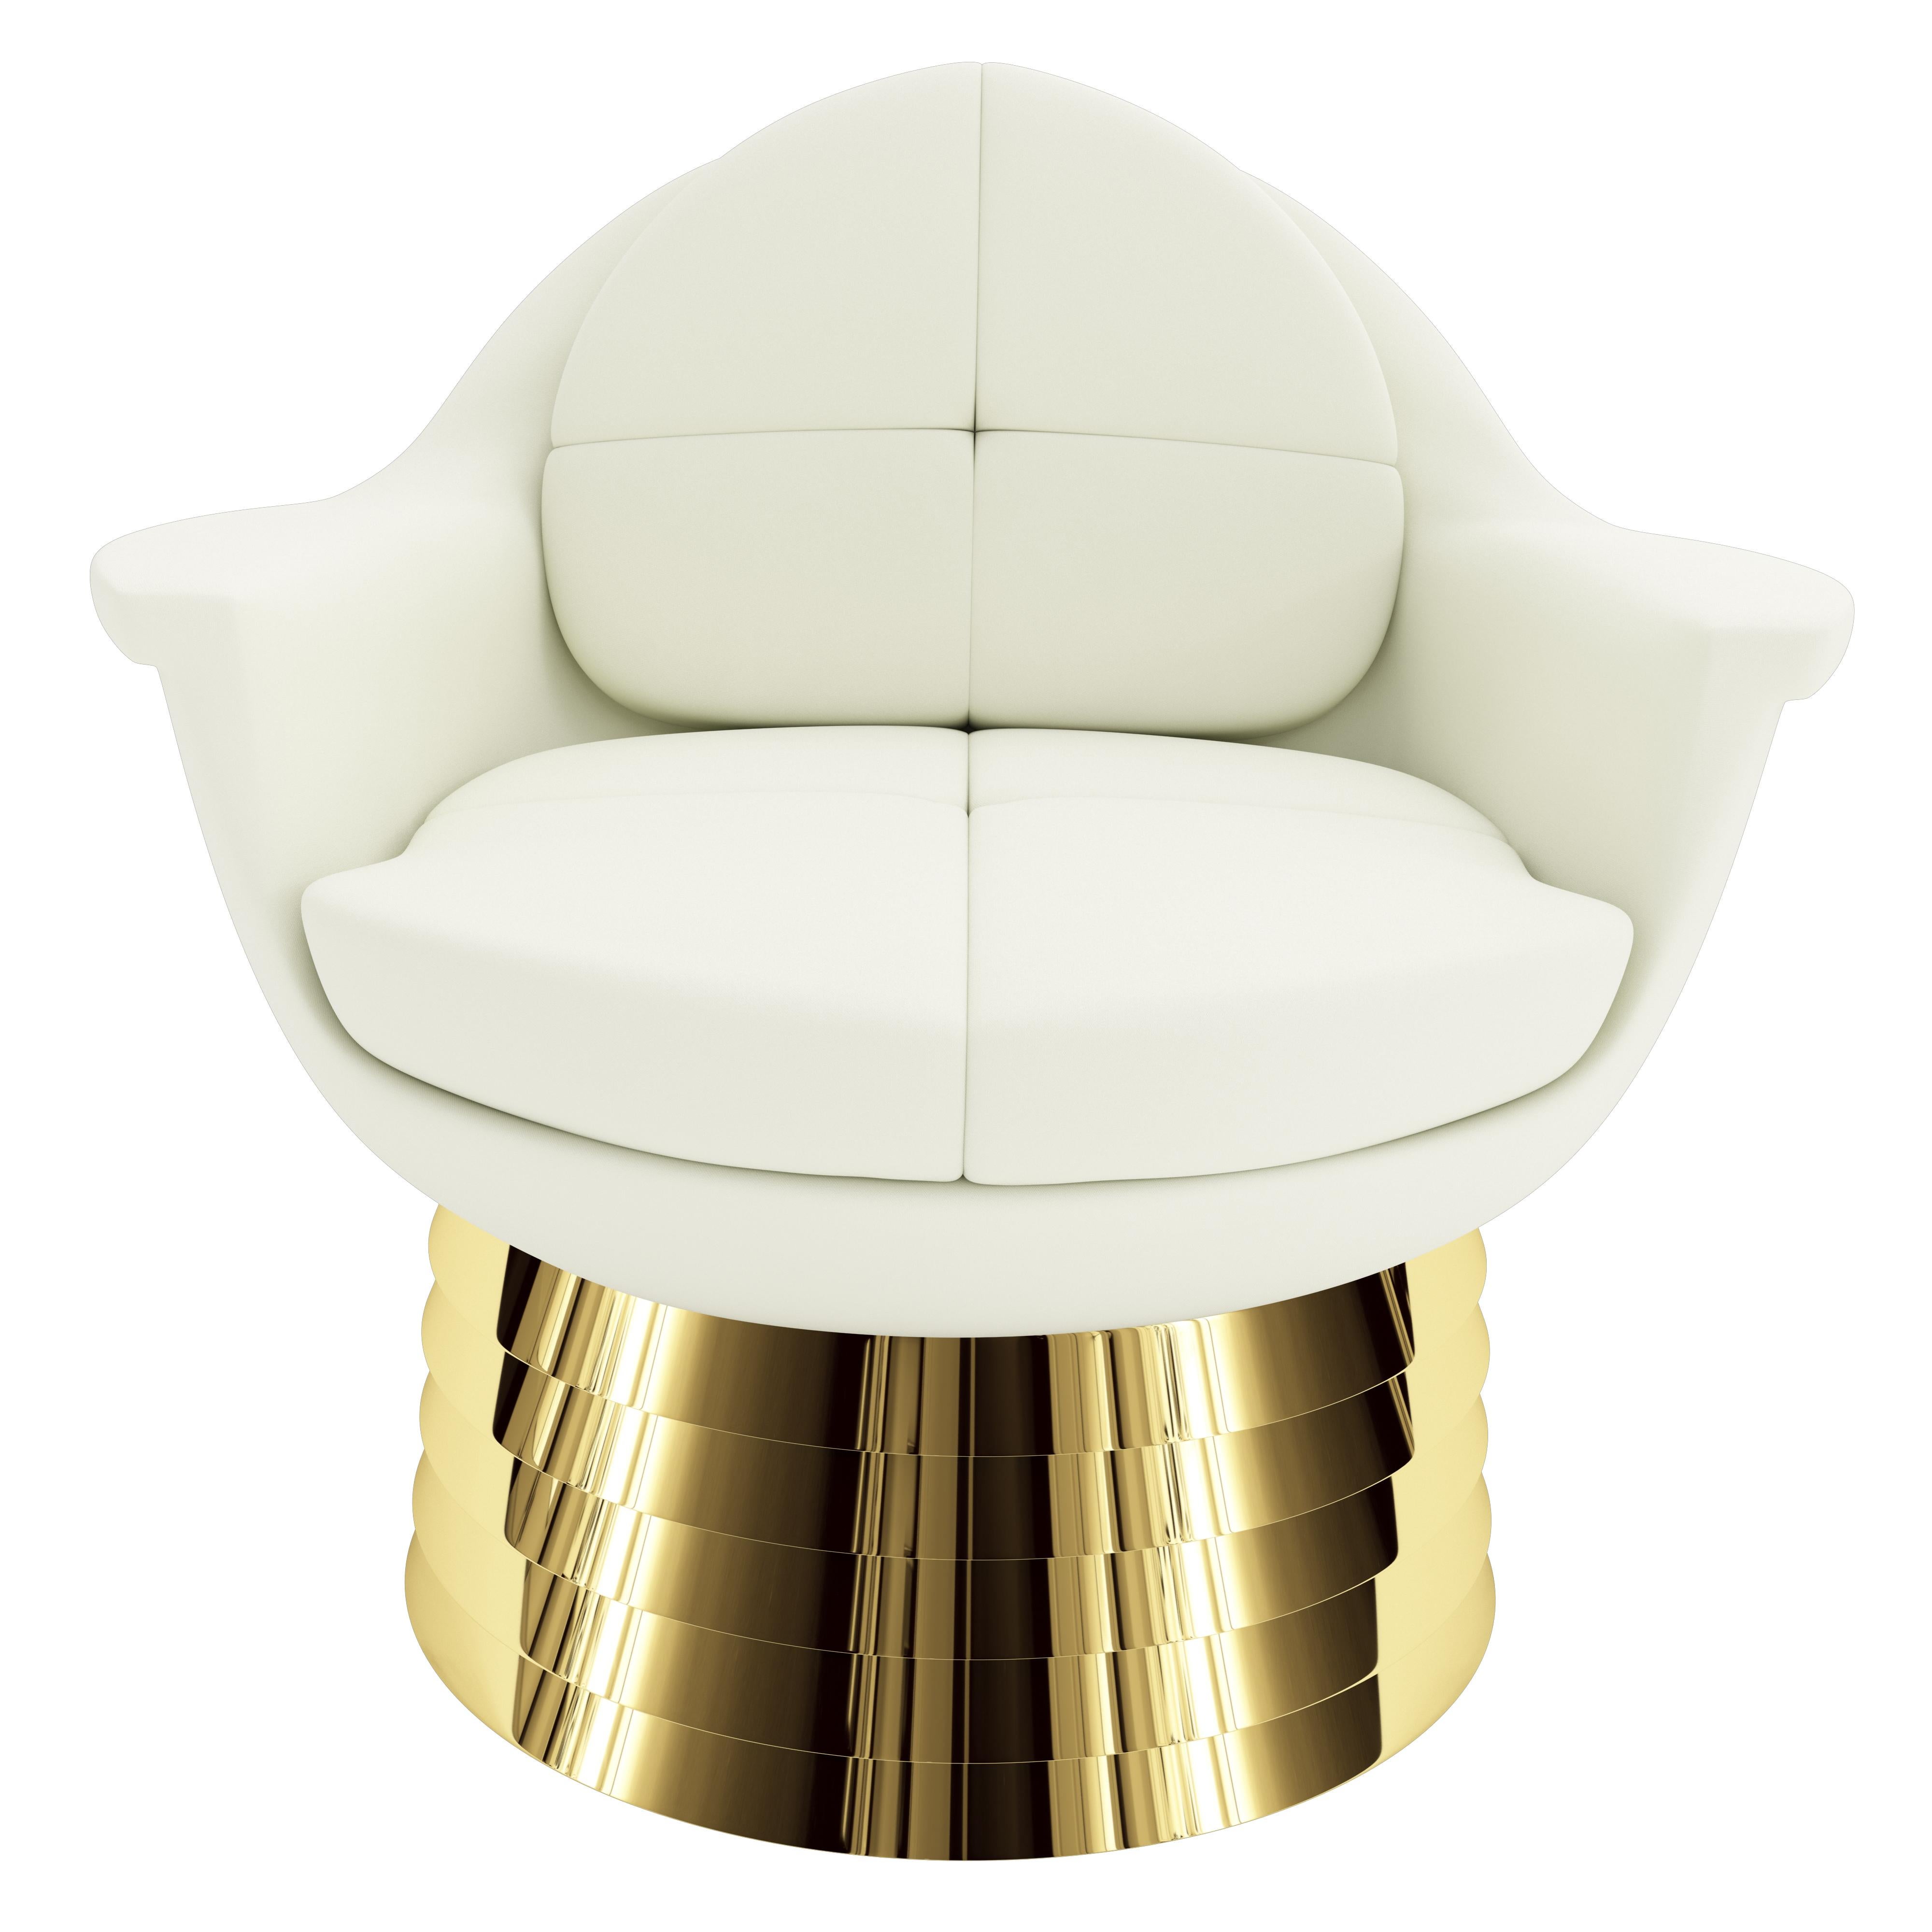 The Iris Lounge chair was named after the iris of the human eye. When you look at the lounge chair straight on, the wing tip armrests and round shape reflect the symmetry of the eye. The base is made from staggered polished brass, and the seat is